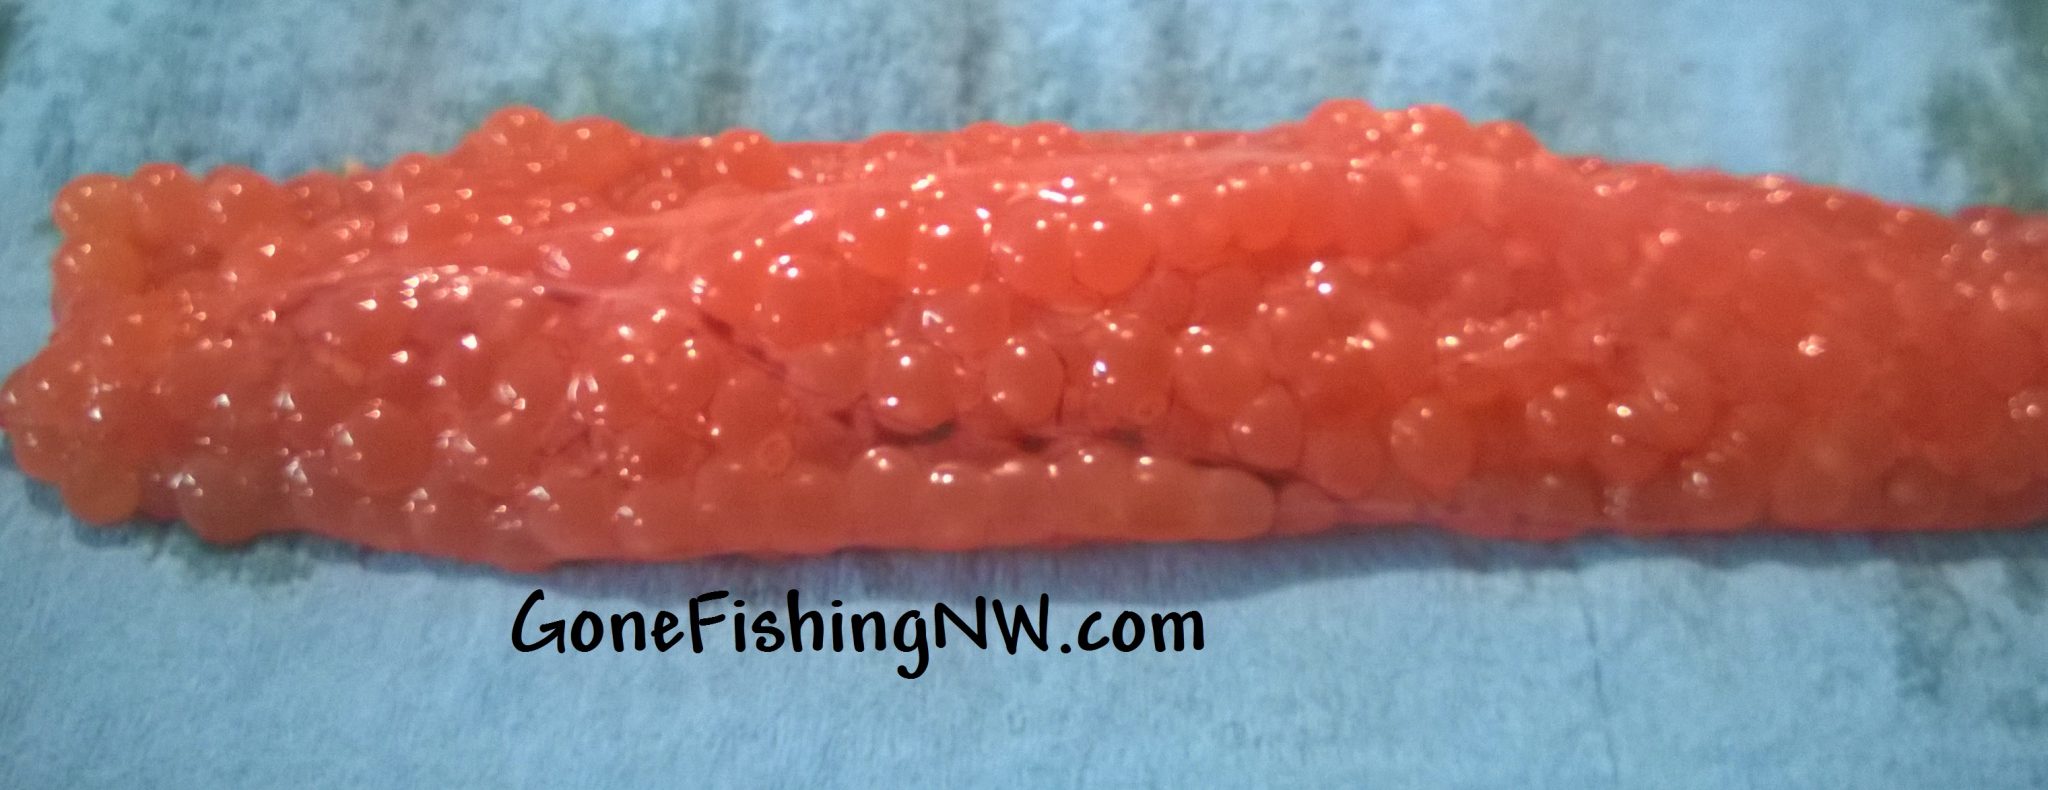 http://gonefishingnw.com/wp-content/uploads/2015/09/Simple-Curing-Roe-Part-1.jpg